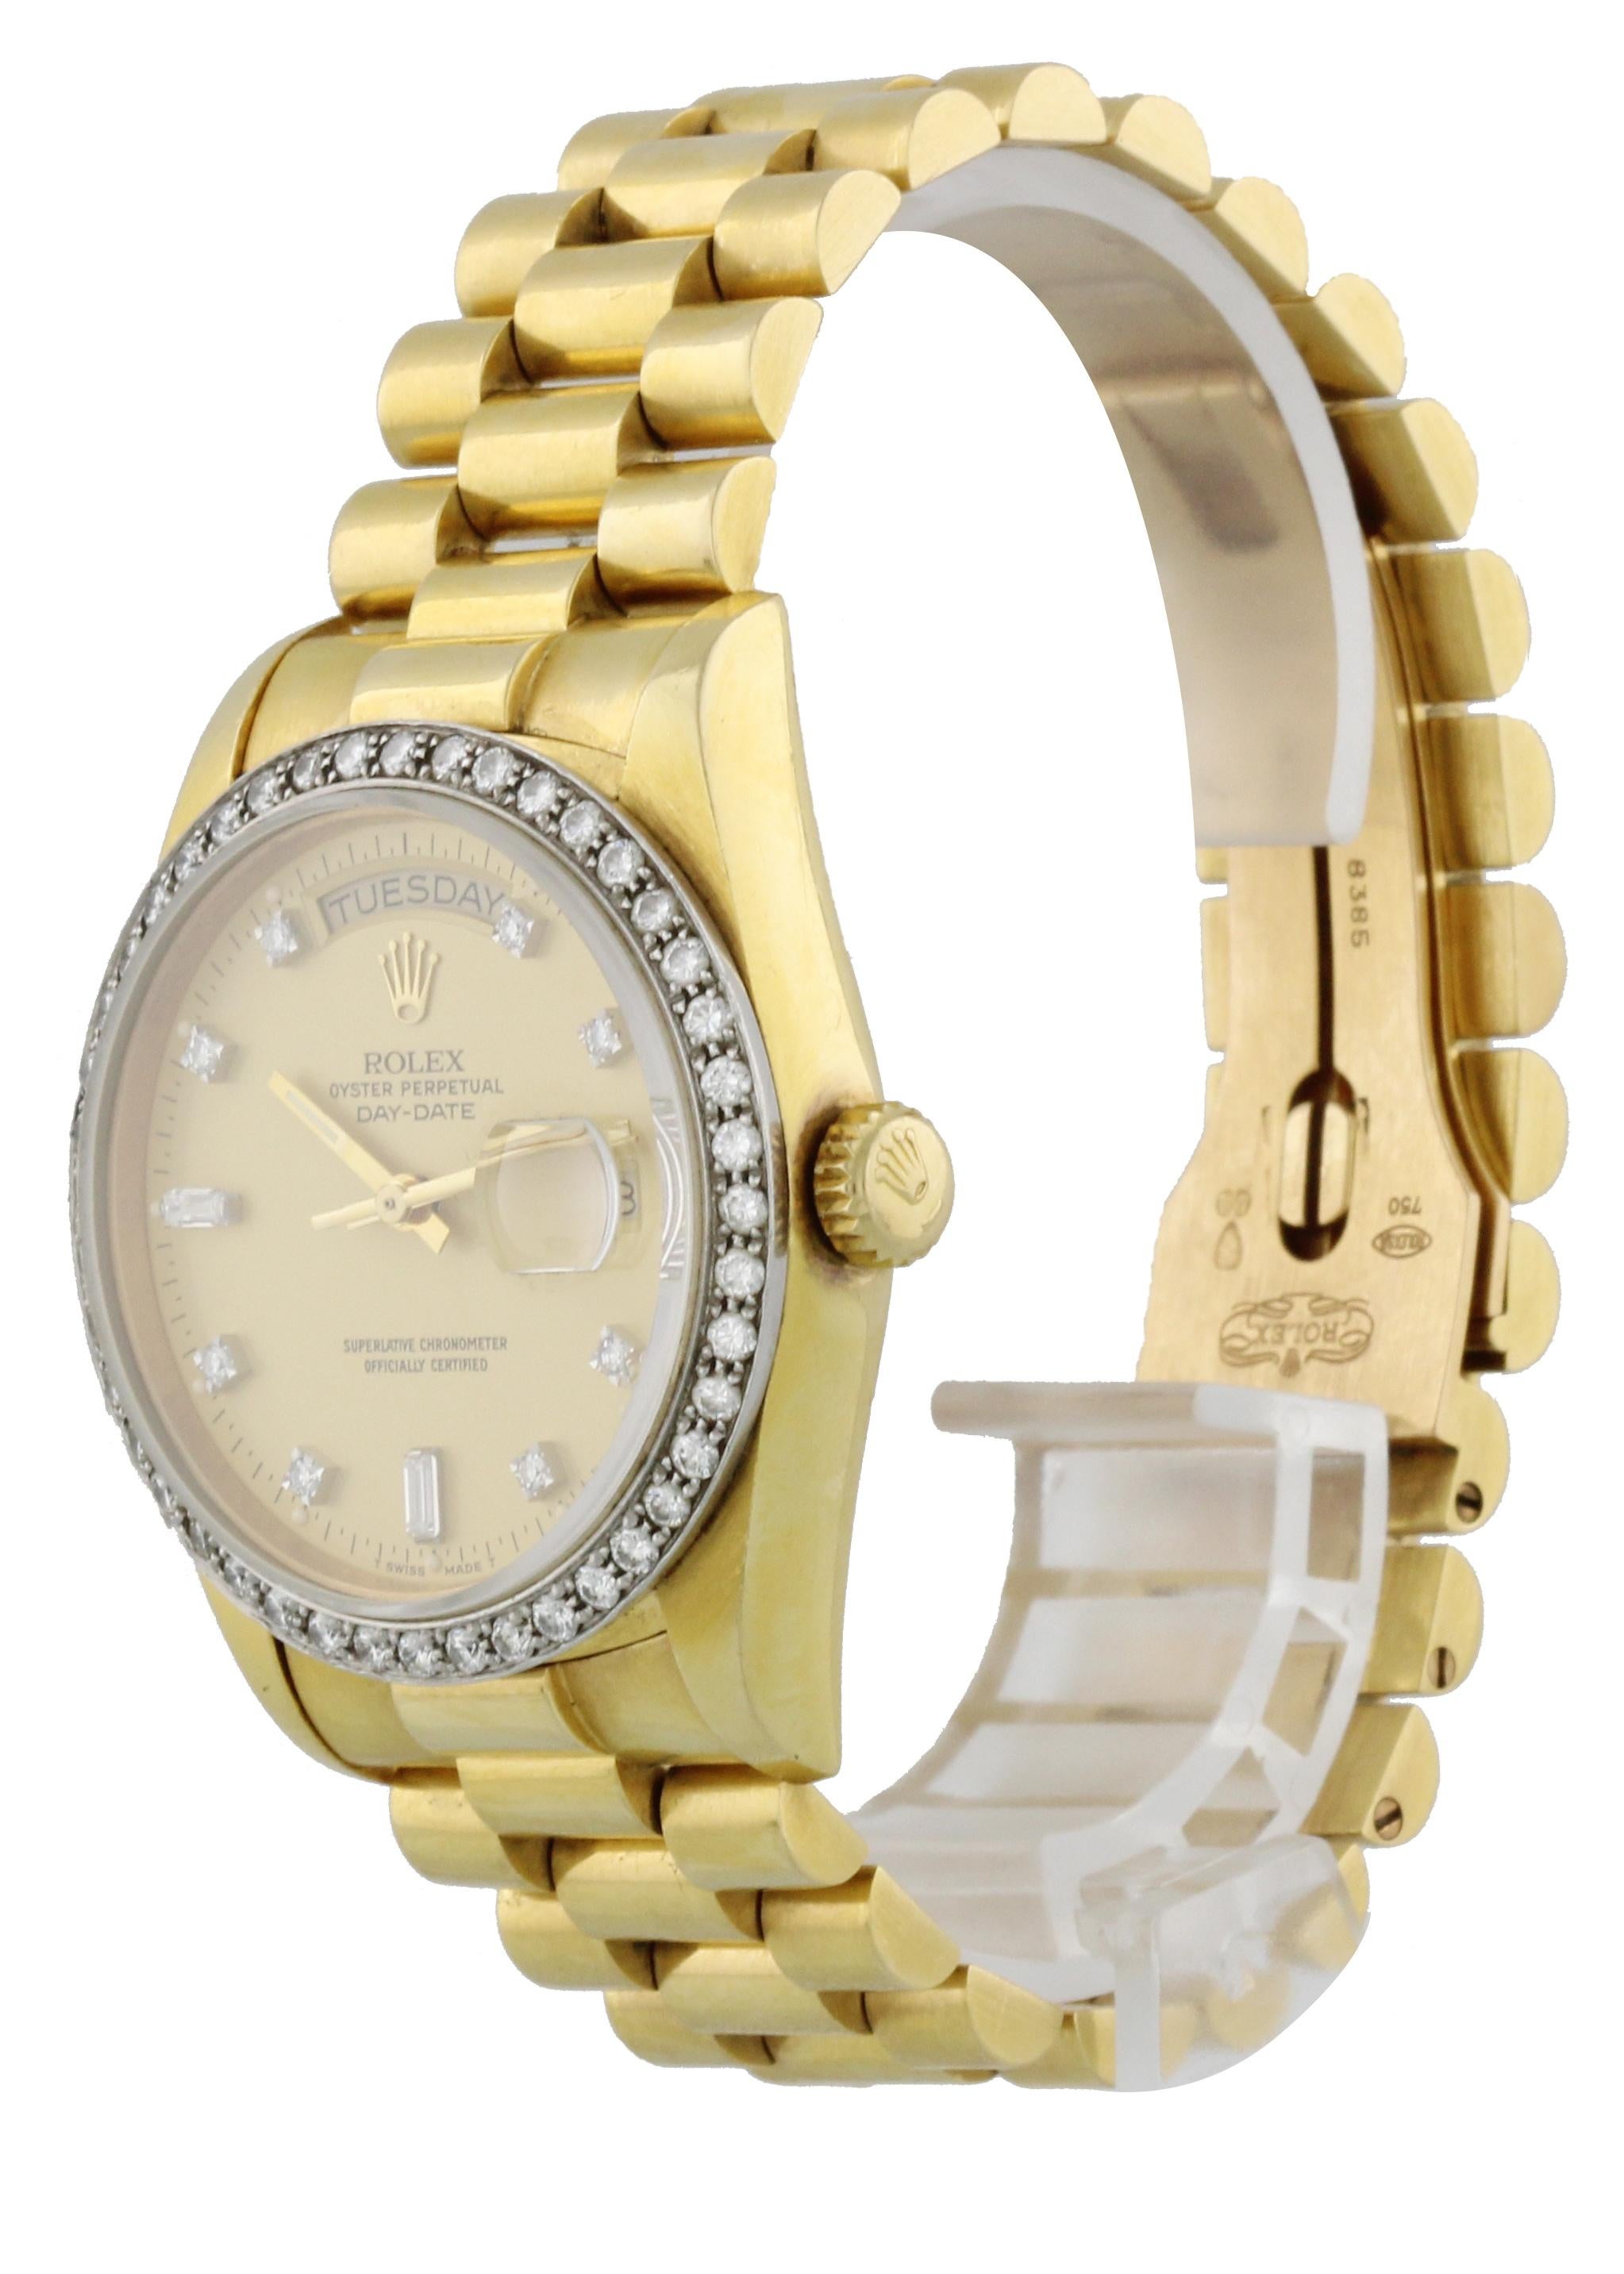 Rolex Oyster Perpetual Day-Date President 18038 Mens Watch. 36 mm 18k yellow gold case. Factory 18k white gold bezel with diamonds. Champagne factory placed diamond dial with luminous hands. Day display at 12 o'clock position. Date display at 3